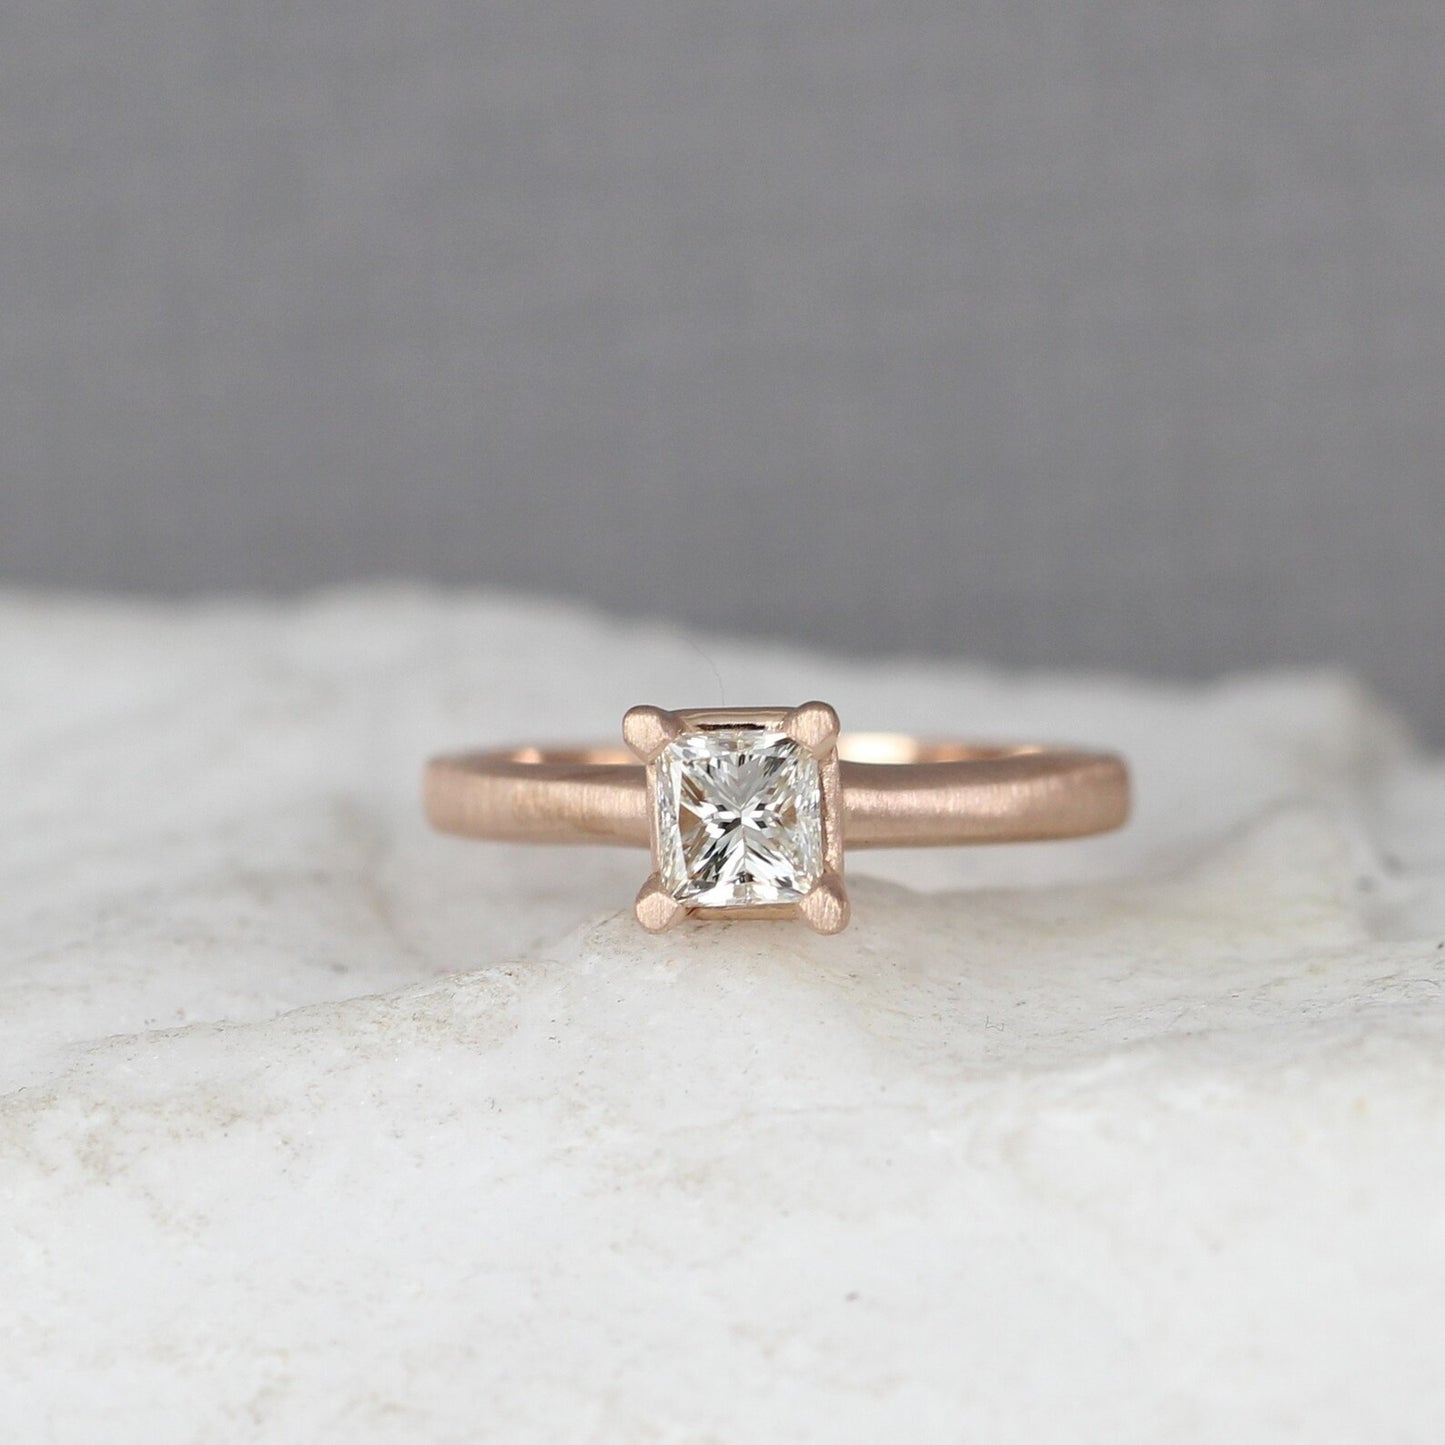 Princess Cut Diamond Solitaire Engagement Ring - 14K Rose Gold - 1/2 carat Canadian diamond - Made in Canada